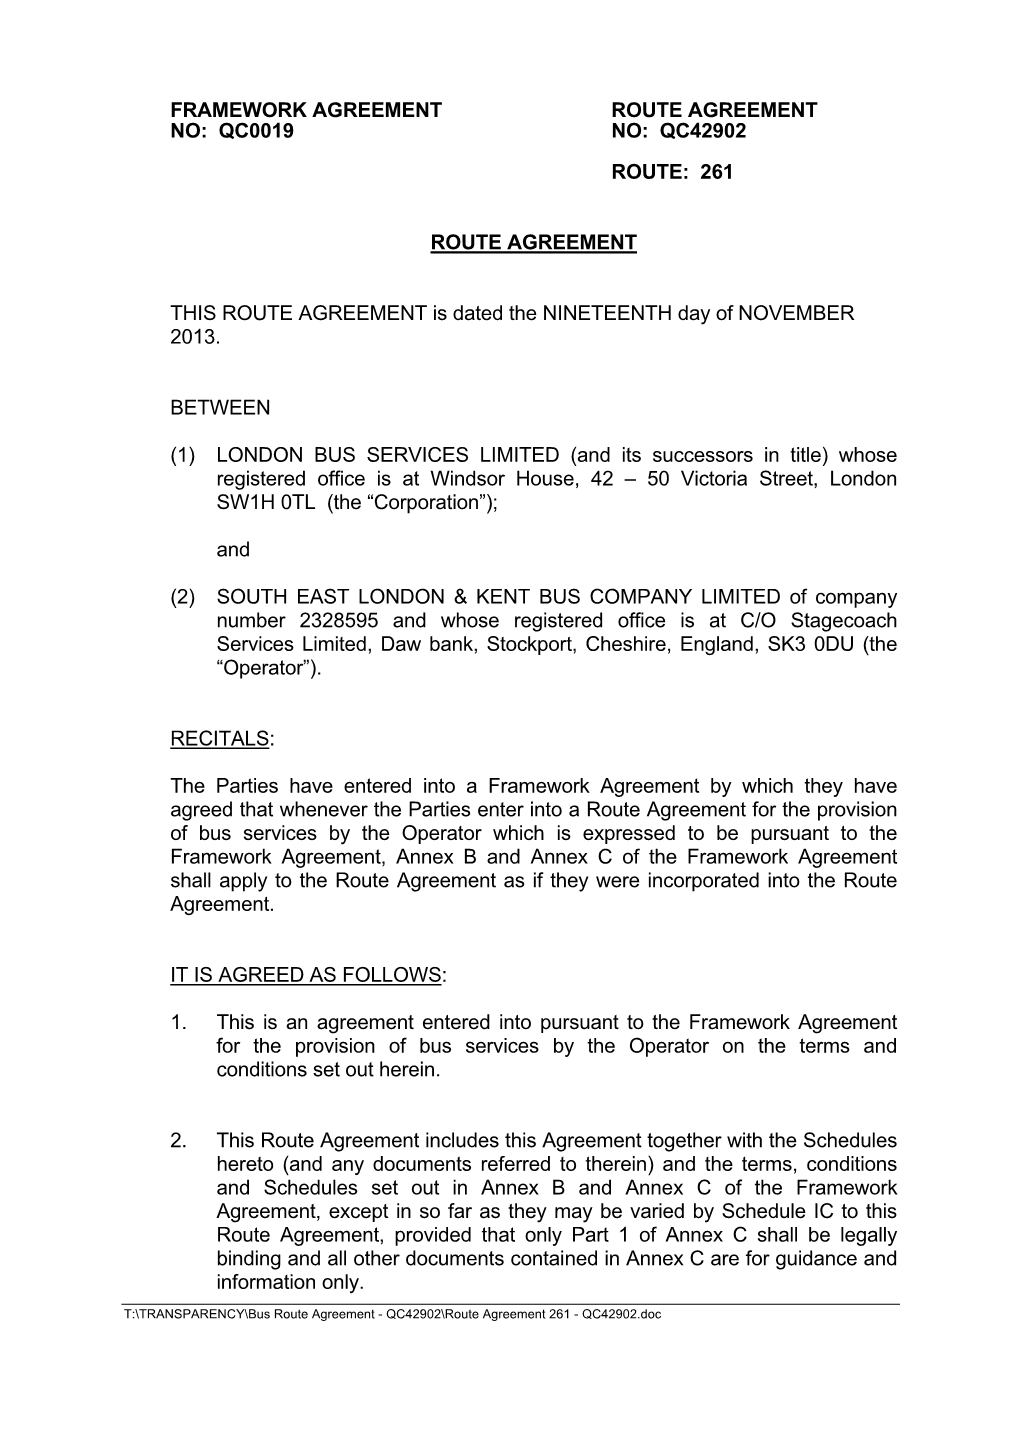 Qc0019 Route Agreement No